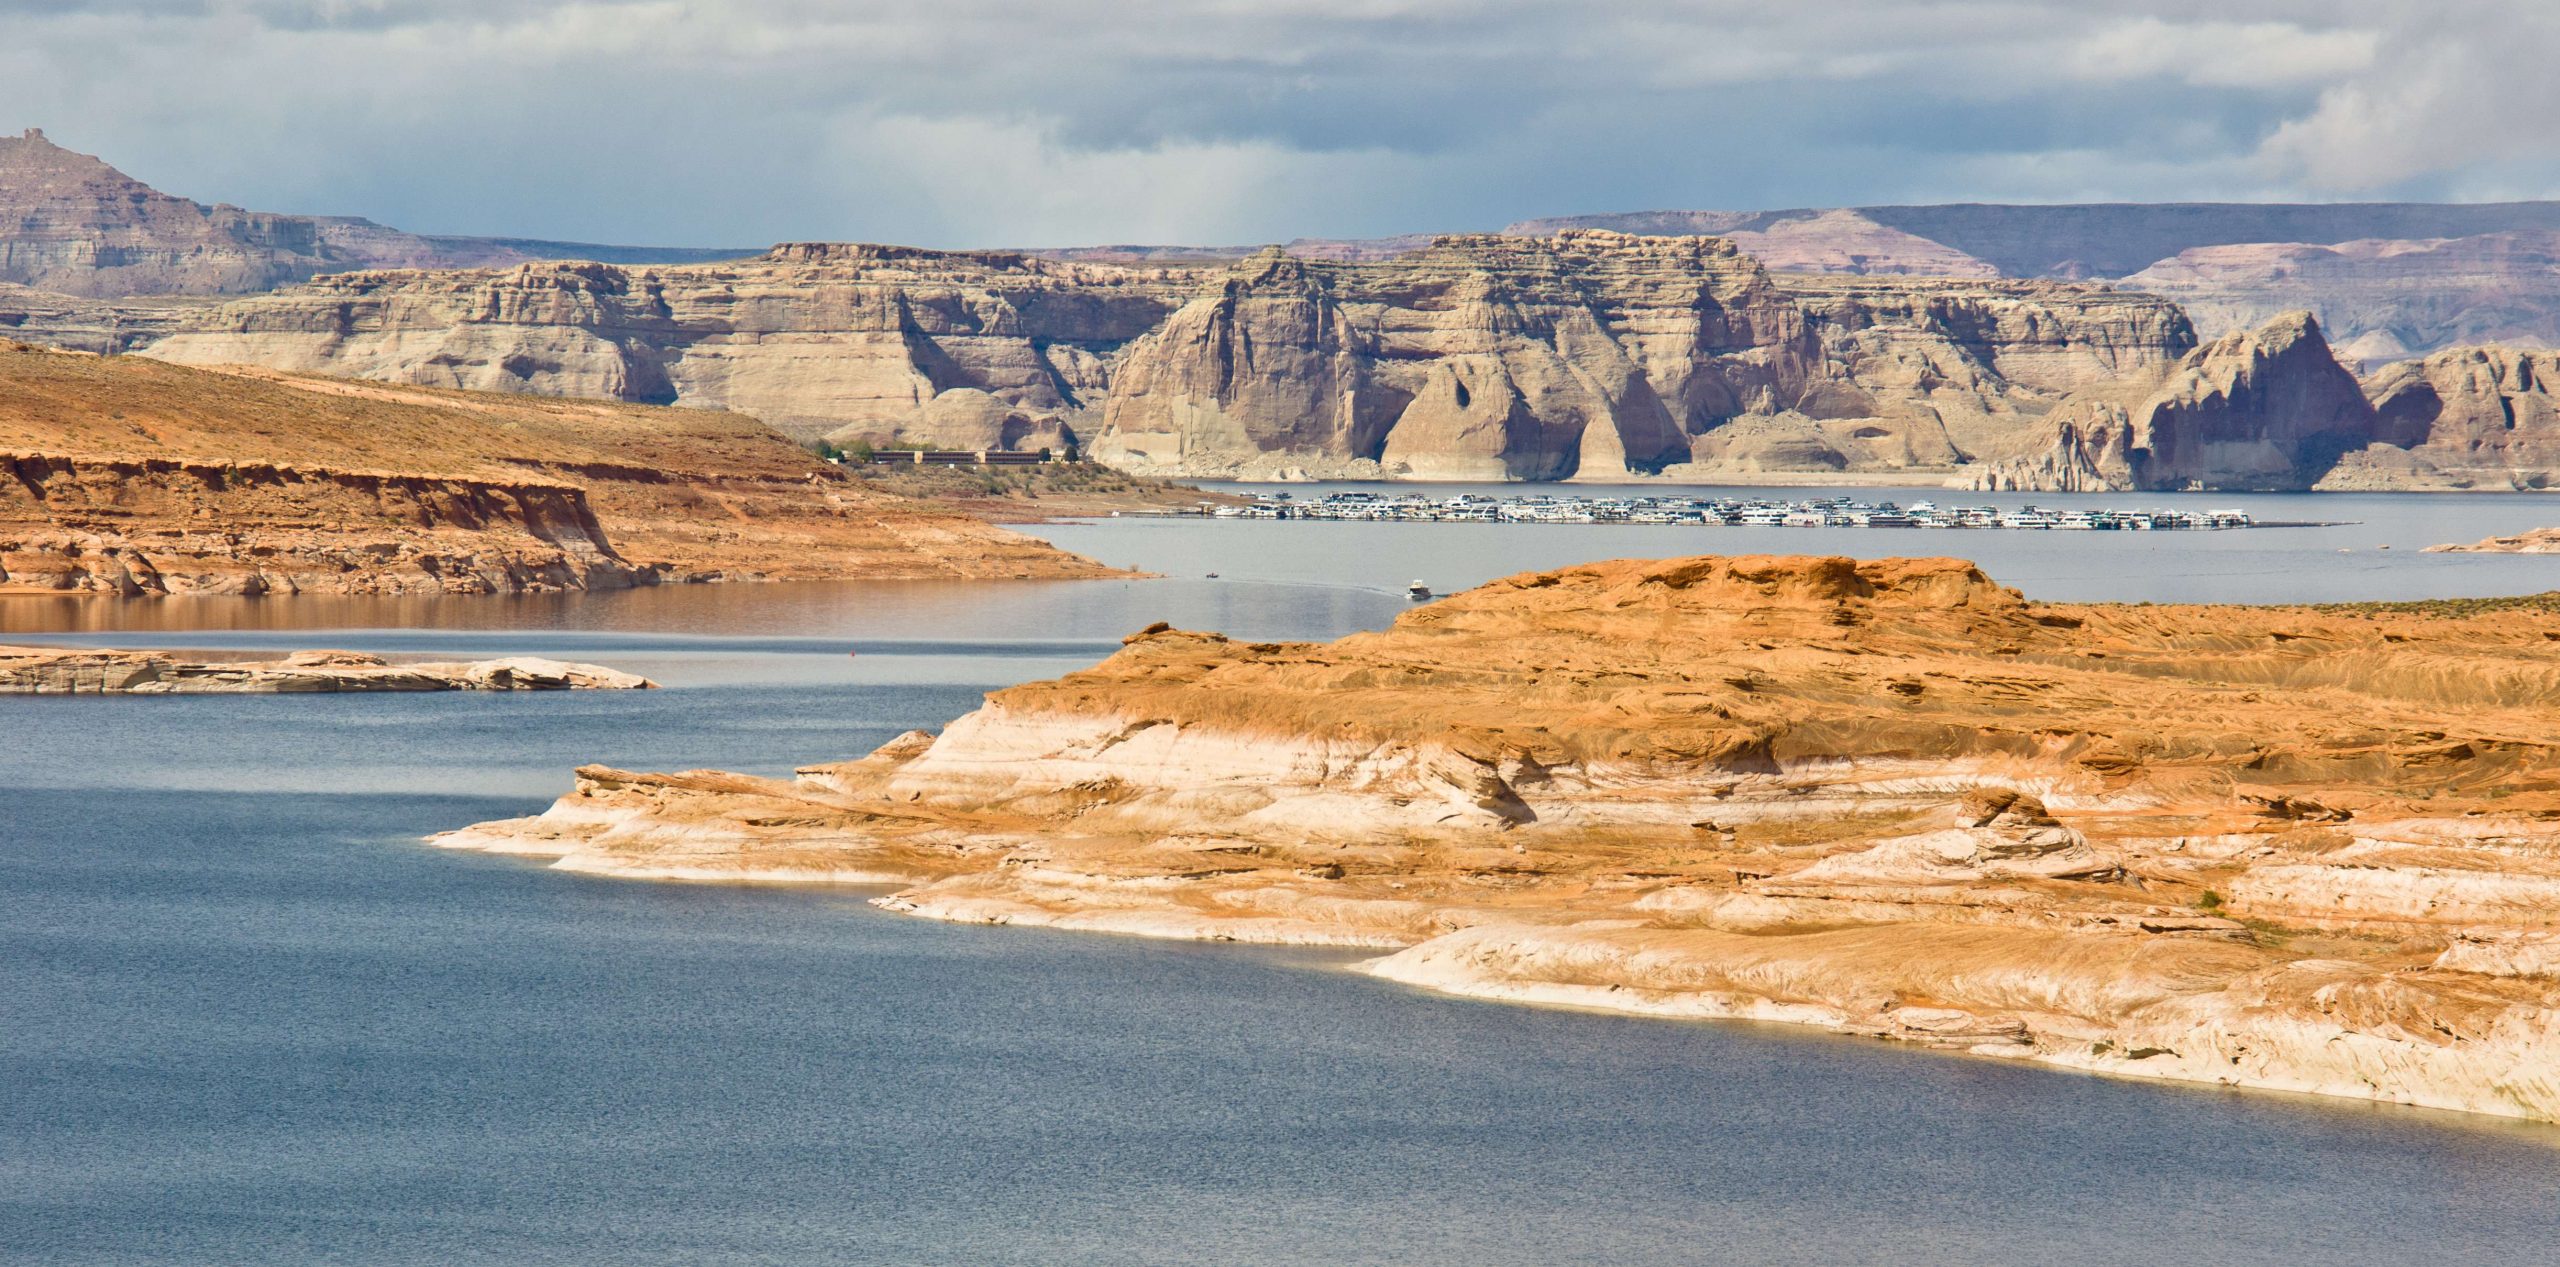 Lake Powell is a reservoir located on the Colorado River, and it straddles the Utah and Arizona state line. It is the second largest man-made reservoir by maximum water capacity in the U.S. behind Lake Mead.